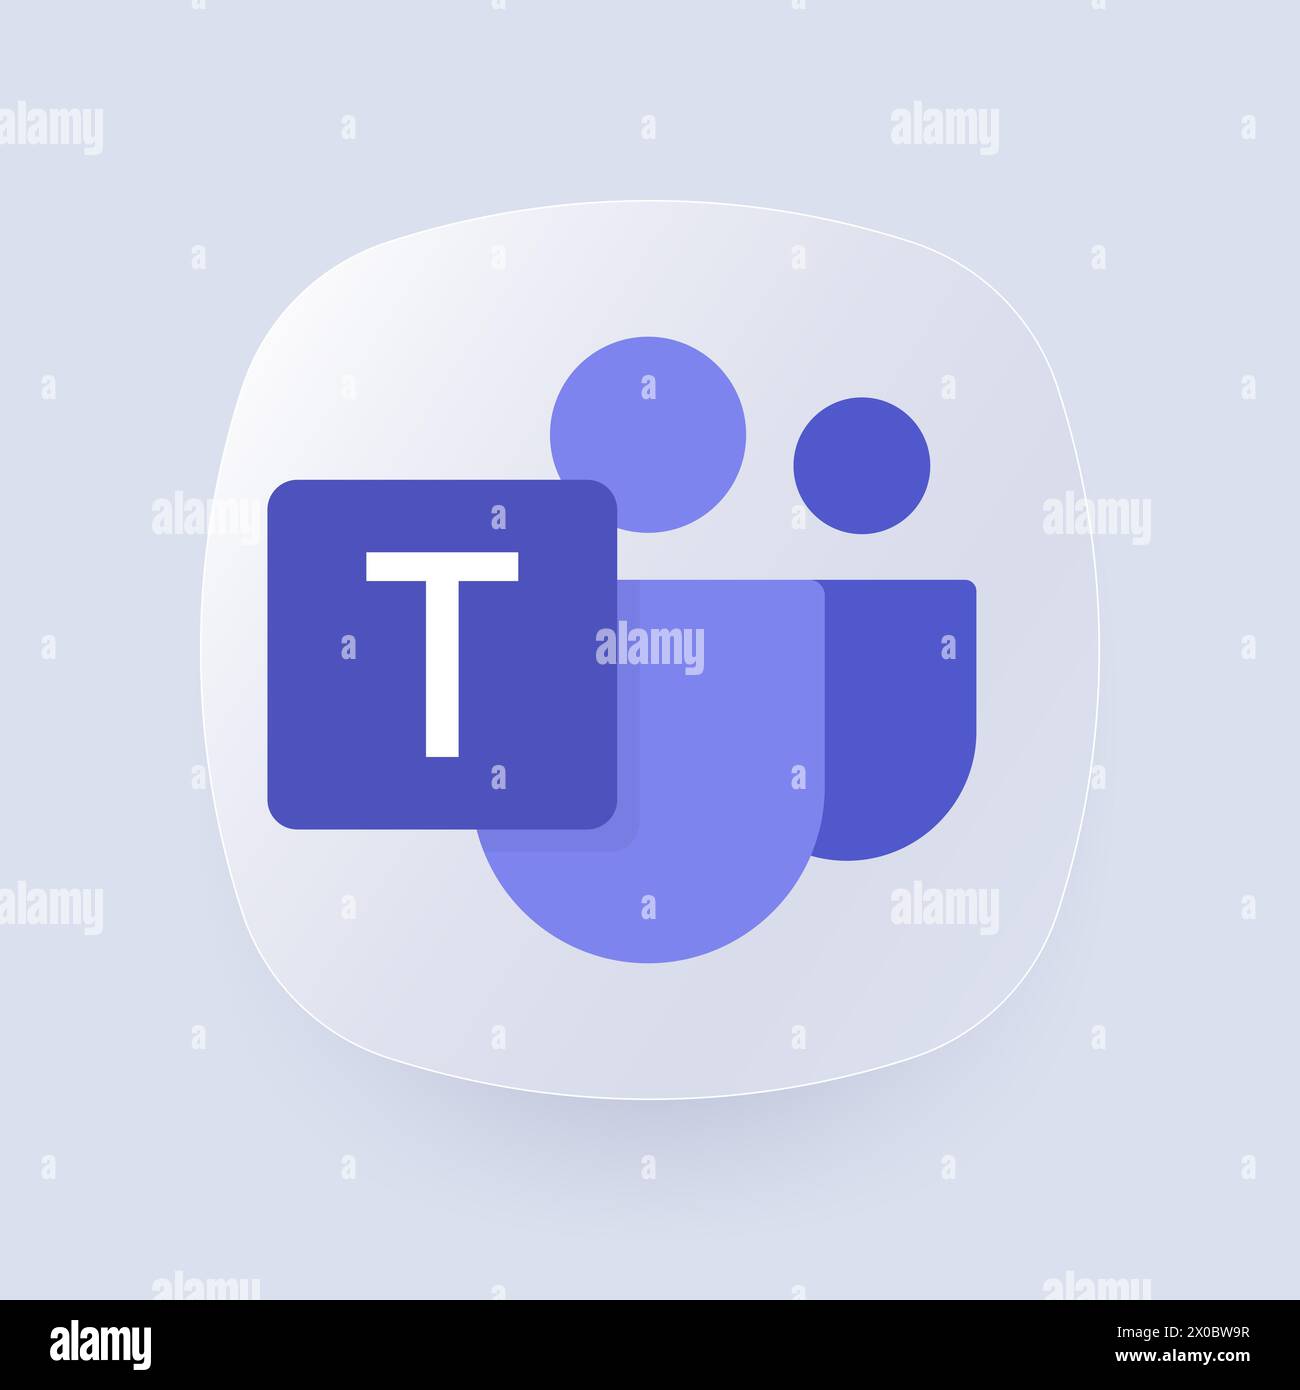 Microsoft Teams logo. Enterprise platform that integrates chat, meetings, notes and attachments into a workspace. Microsoft Office 365 logotype. Micro Stock Vector